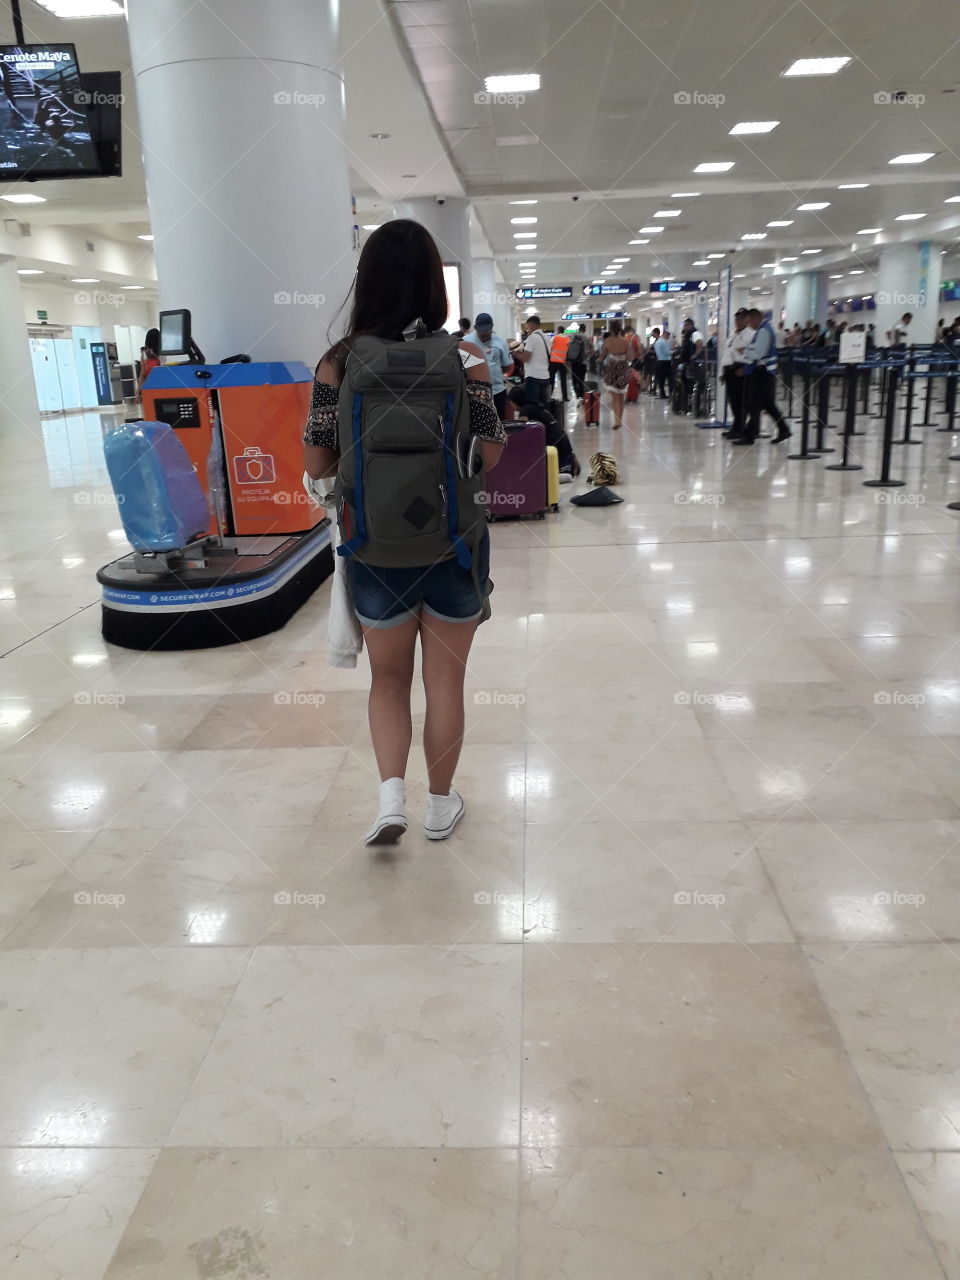 walking at the airport to travel